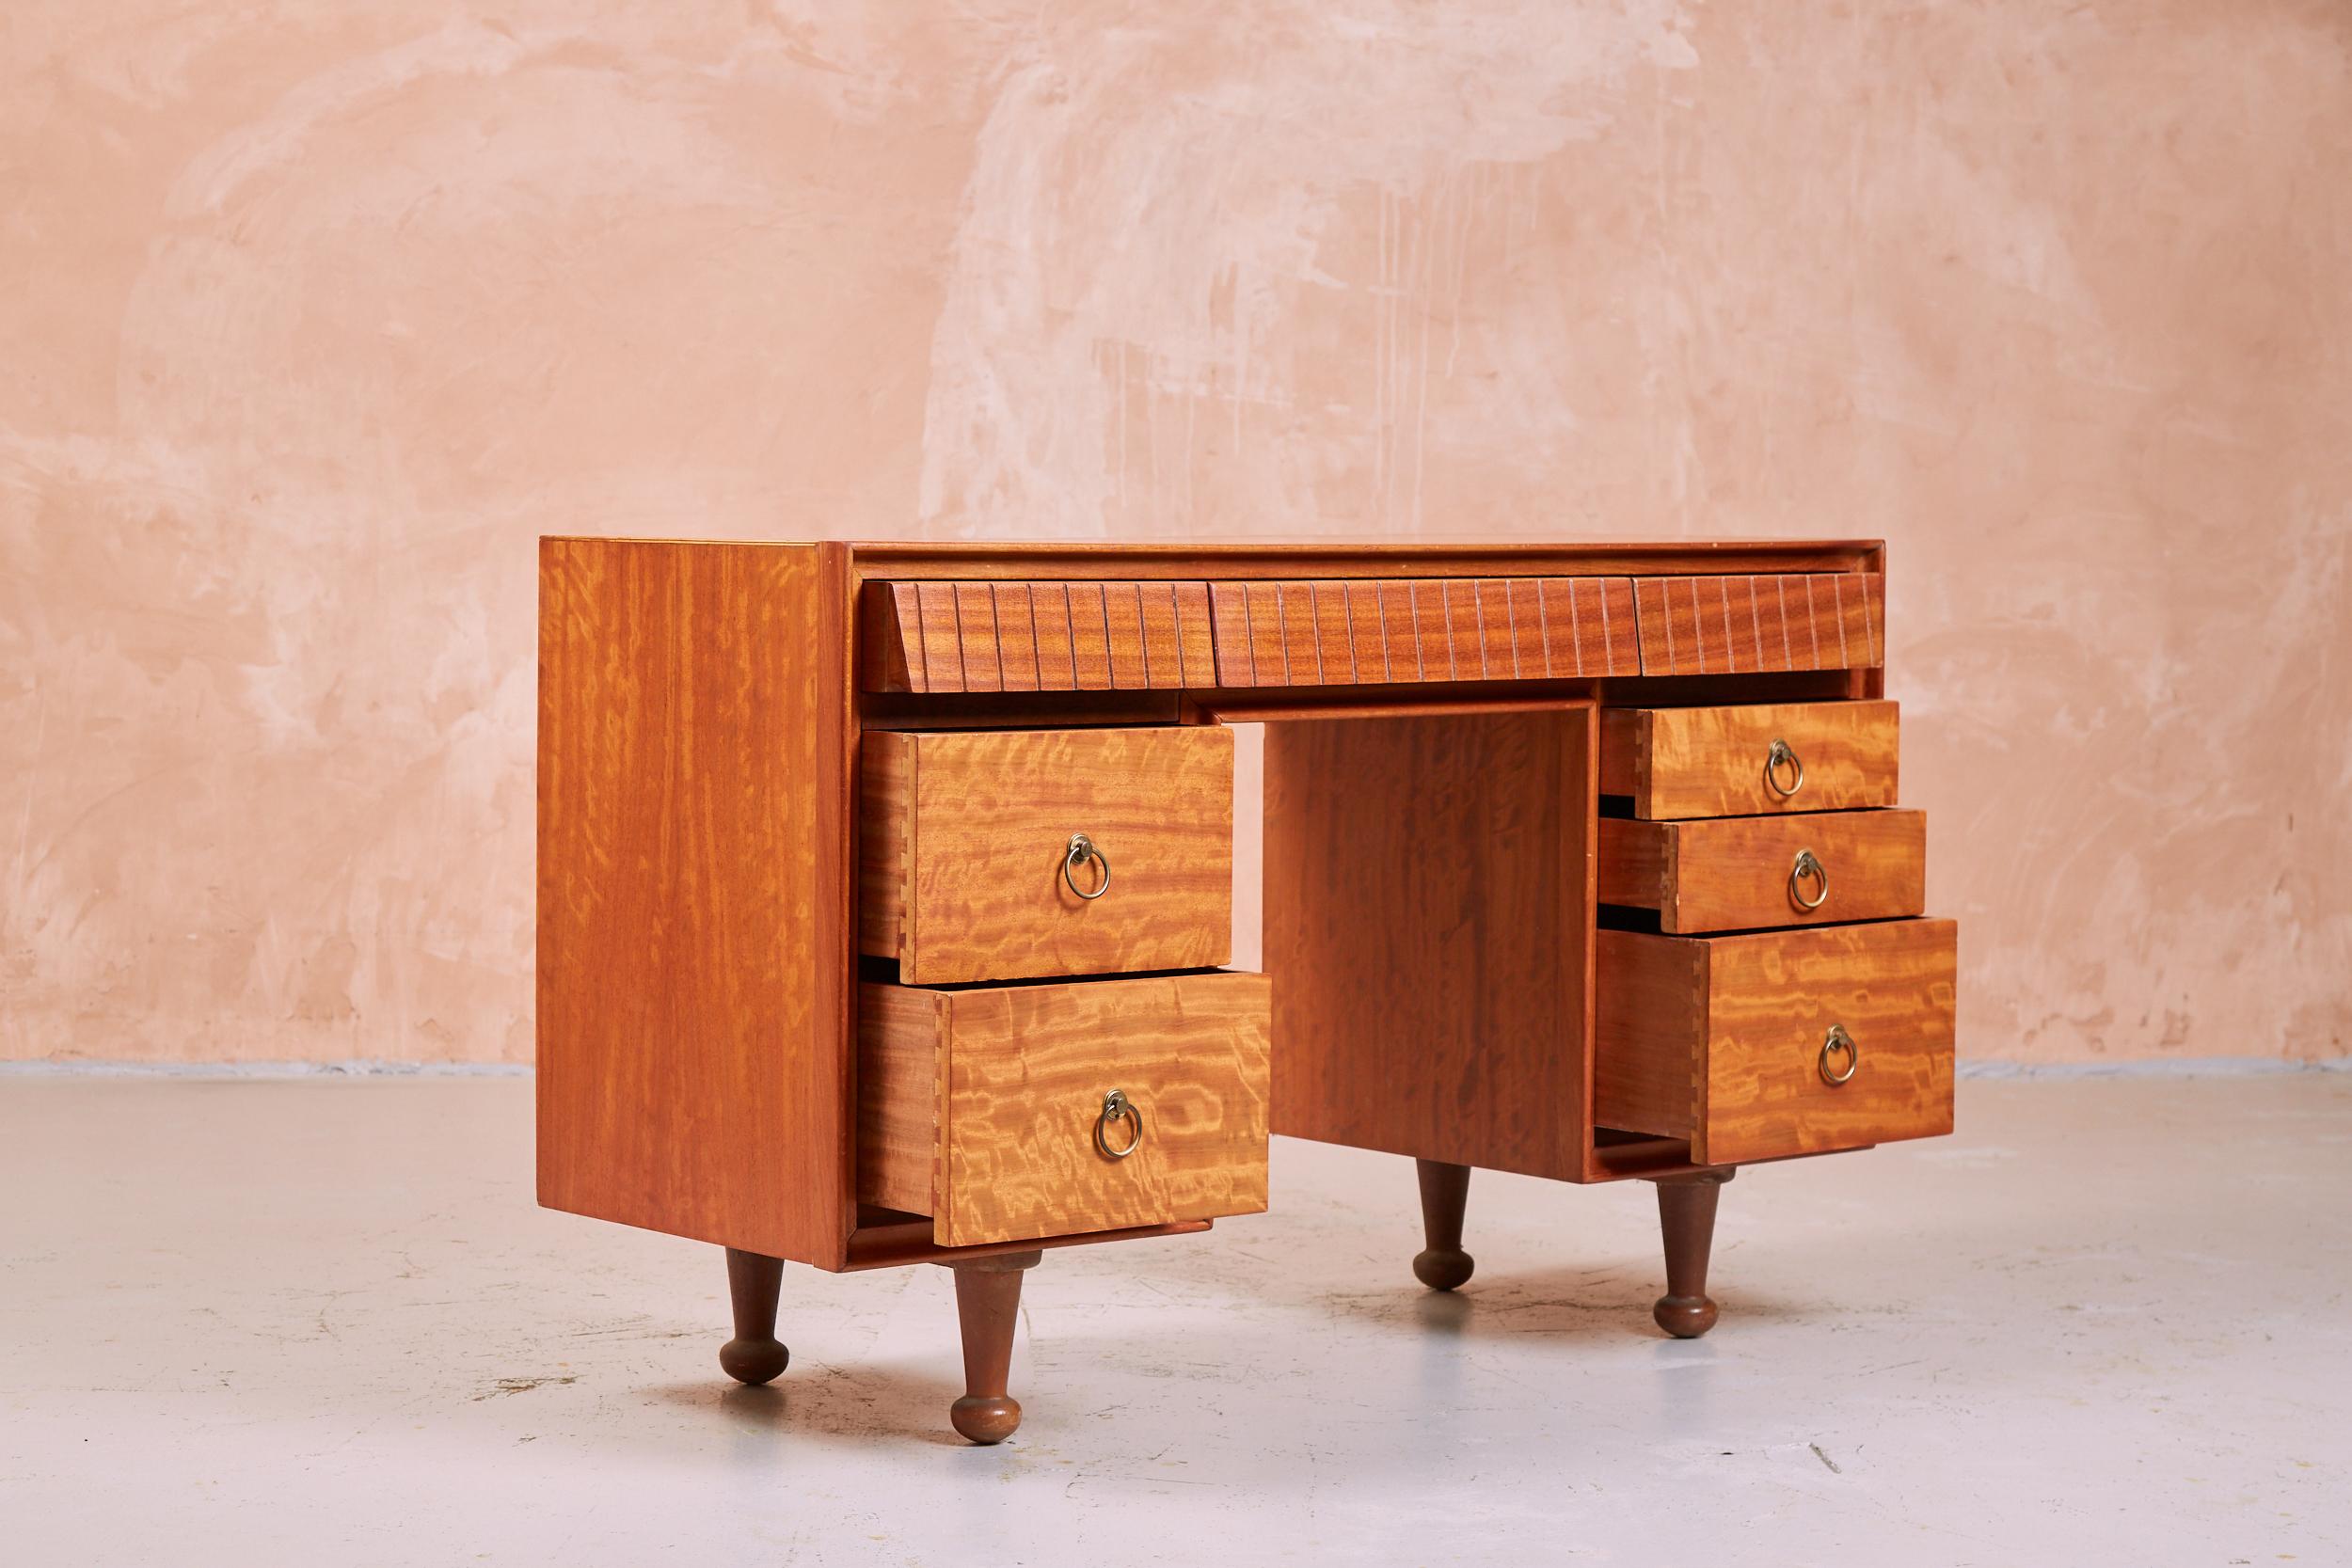 A vintage 1950s dressing table which can also be used as a desk or sideboard, designed by AJ Milne for Heals. The Satinwood veneer has a unique shimmering finish. The piece consists of a row of three shallow drawers across the top along with deeper